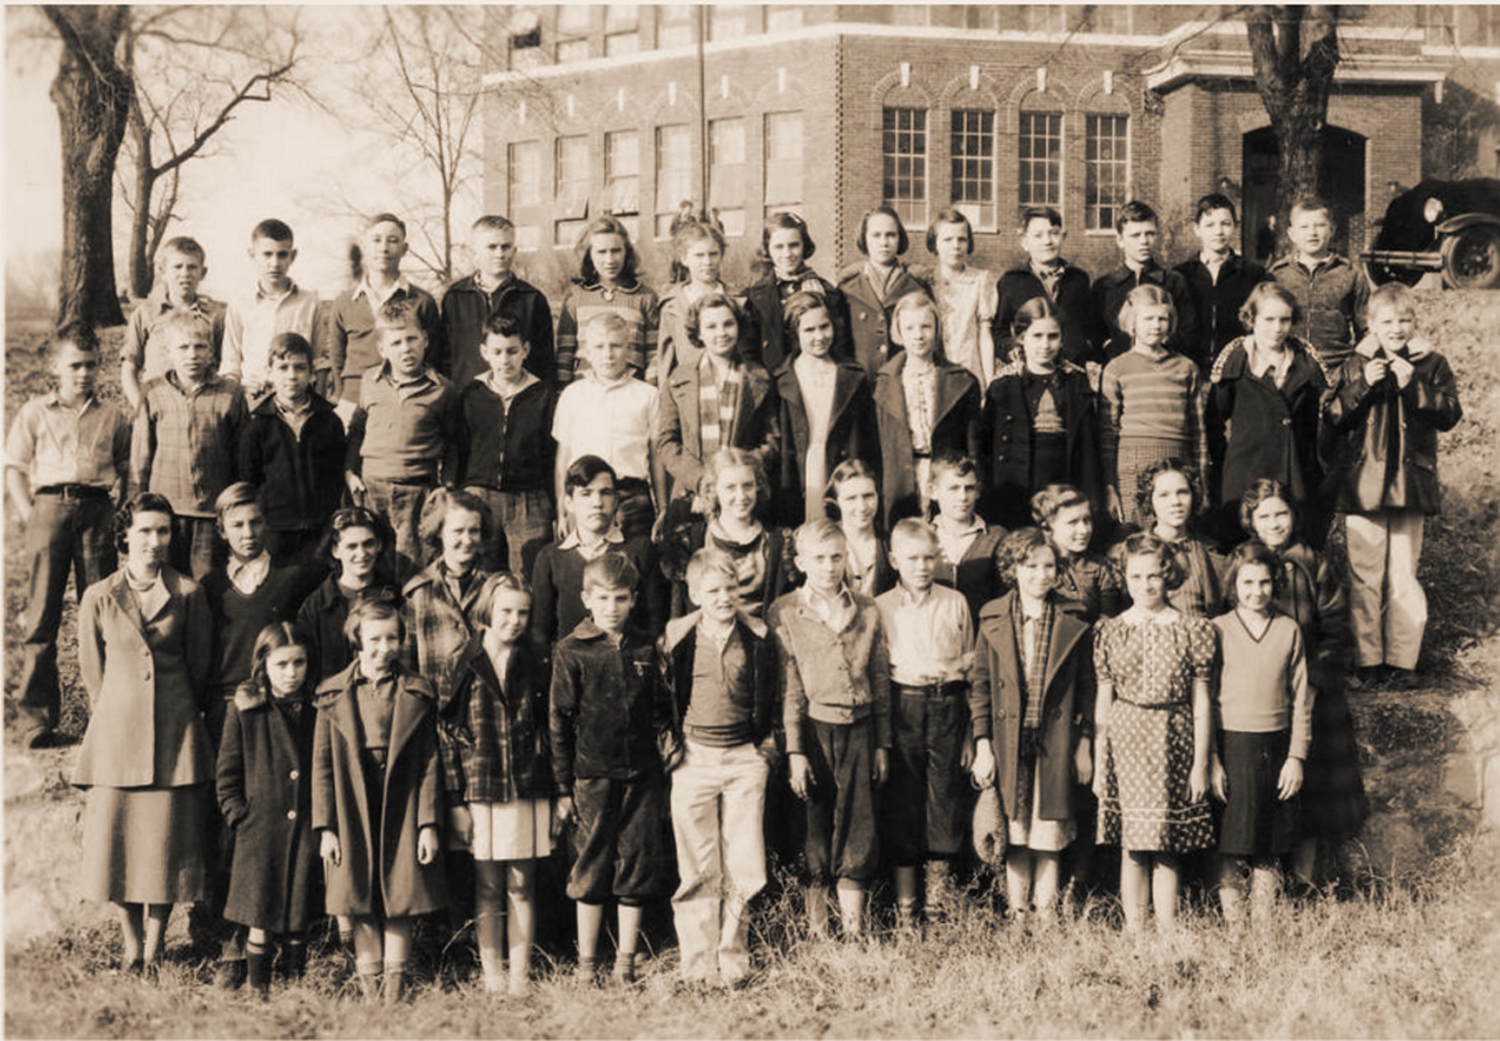 Bearden Grammar School, 1937. Last graduating class of sixth and seventh graders. Courtesy of McClung Historical Collection.